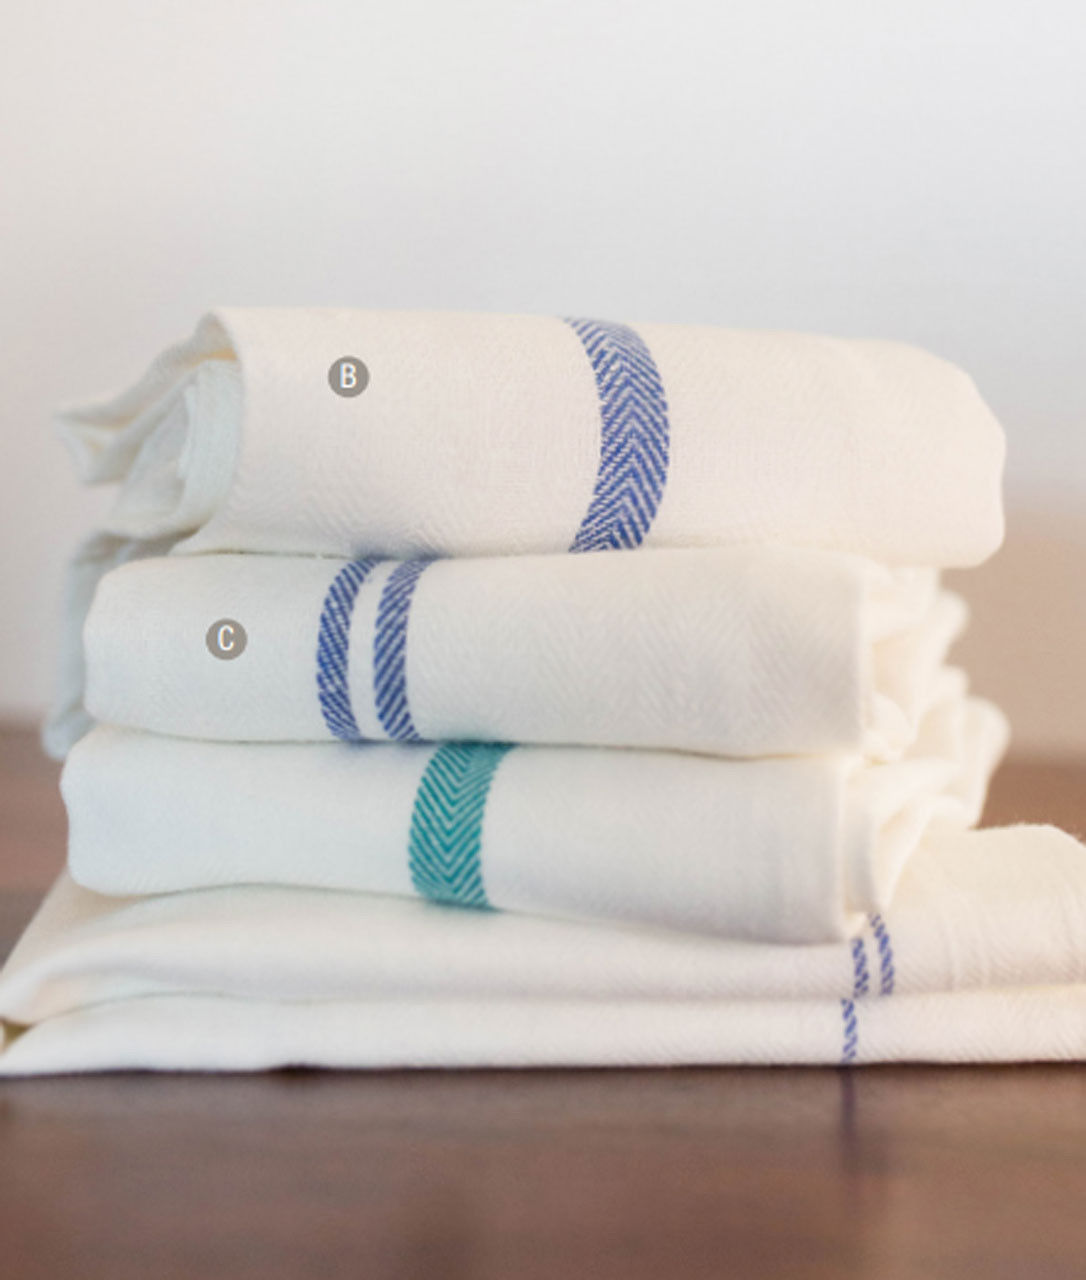 What sizes do the 100 percent cotton kitchen towels come in?